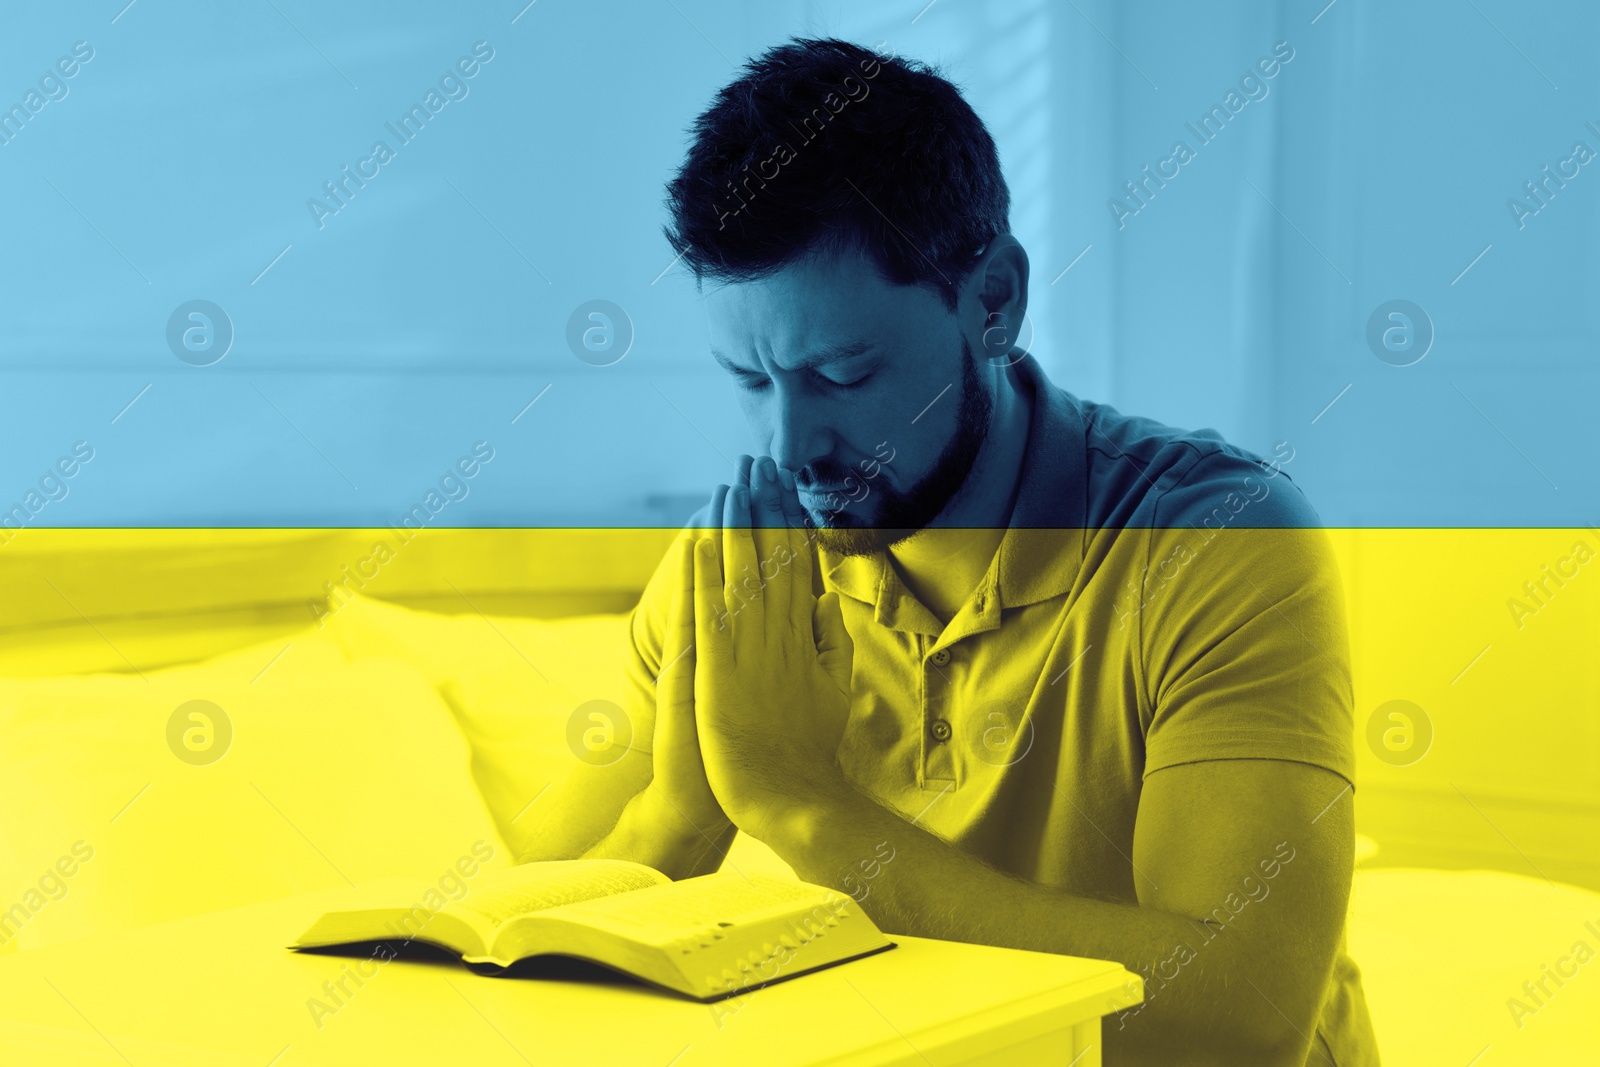 Image of Pray for Ukraine. Double exposure of man with Bible praying in room and Ukrainian national flag